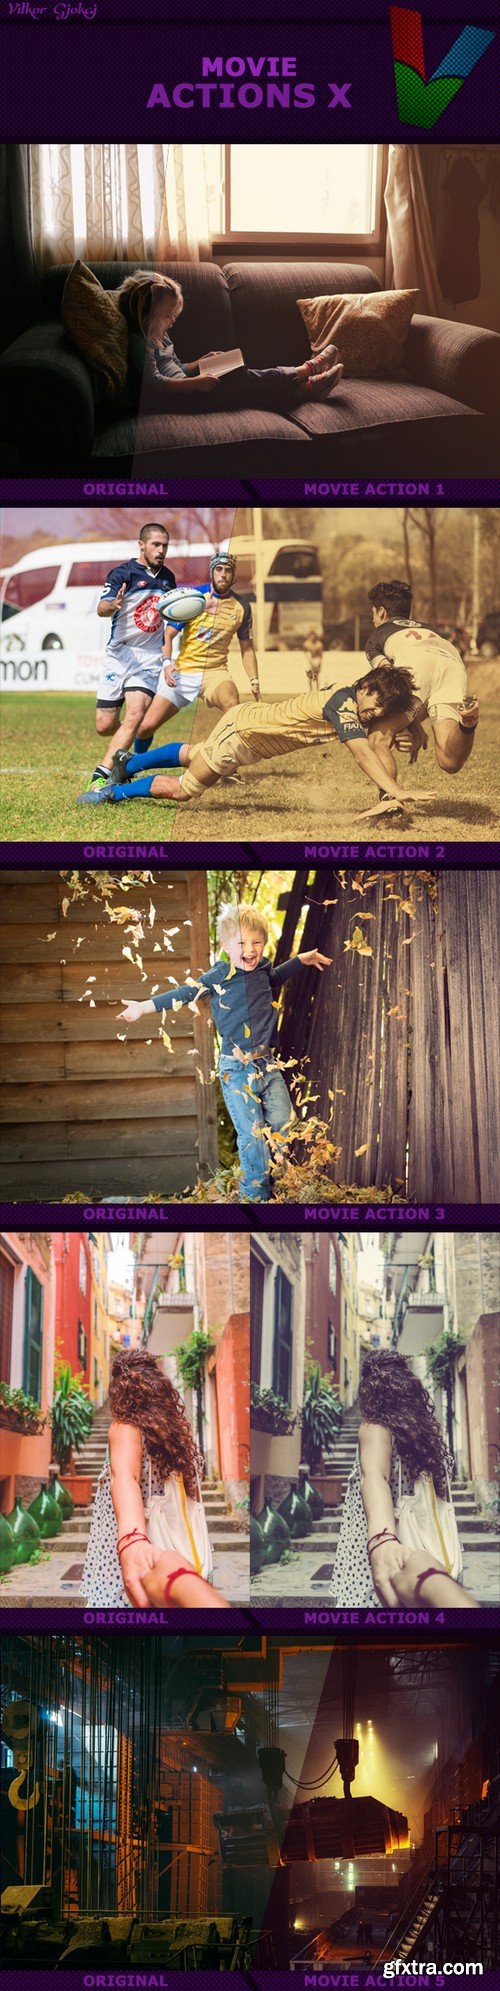 Graphicriver - Movie Actions X 18460216